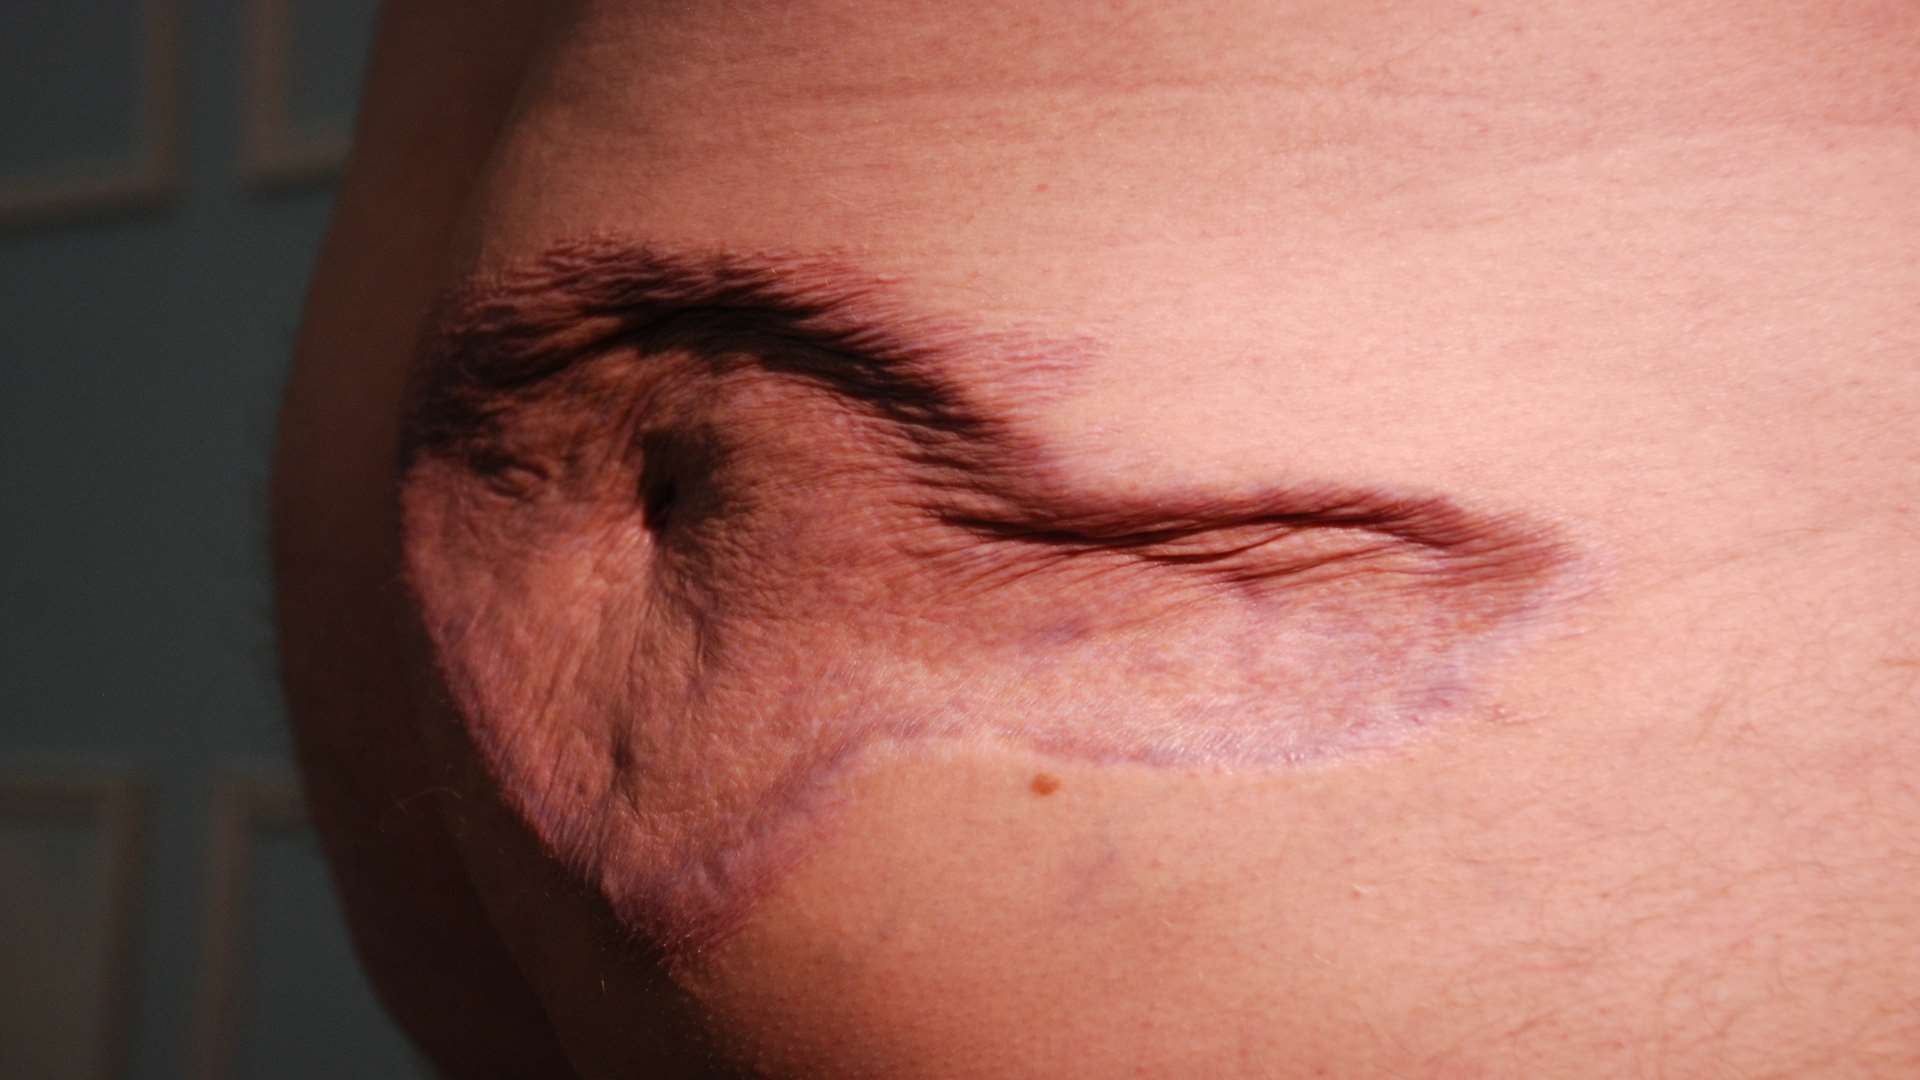 The scar as it looks today